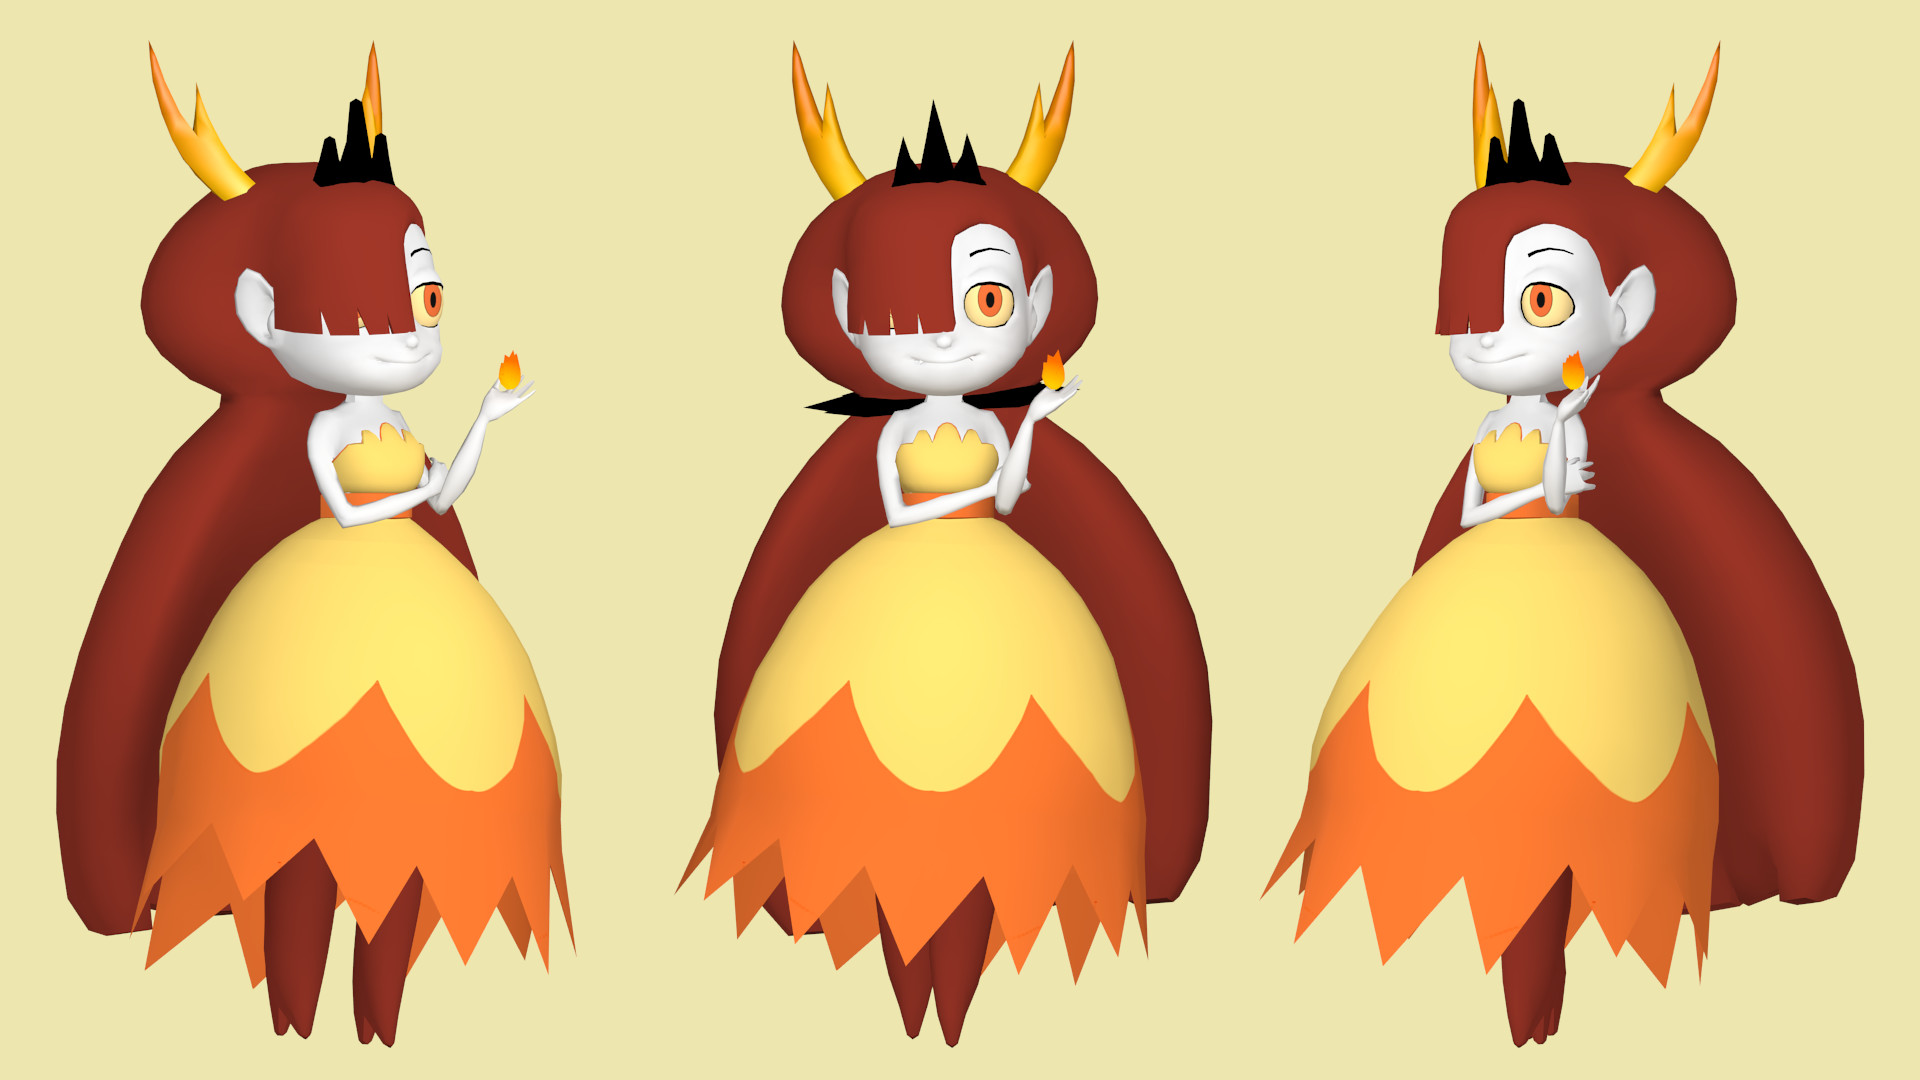 Hekapoo Check Out Inspiring Examples Of Hekapoo Artwork On Deviantart And Get Inspired By Our